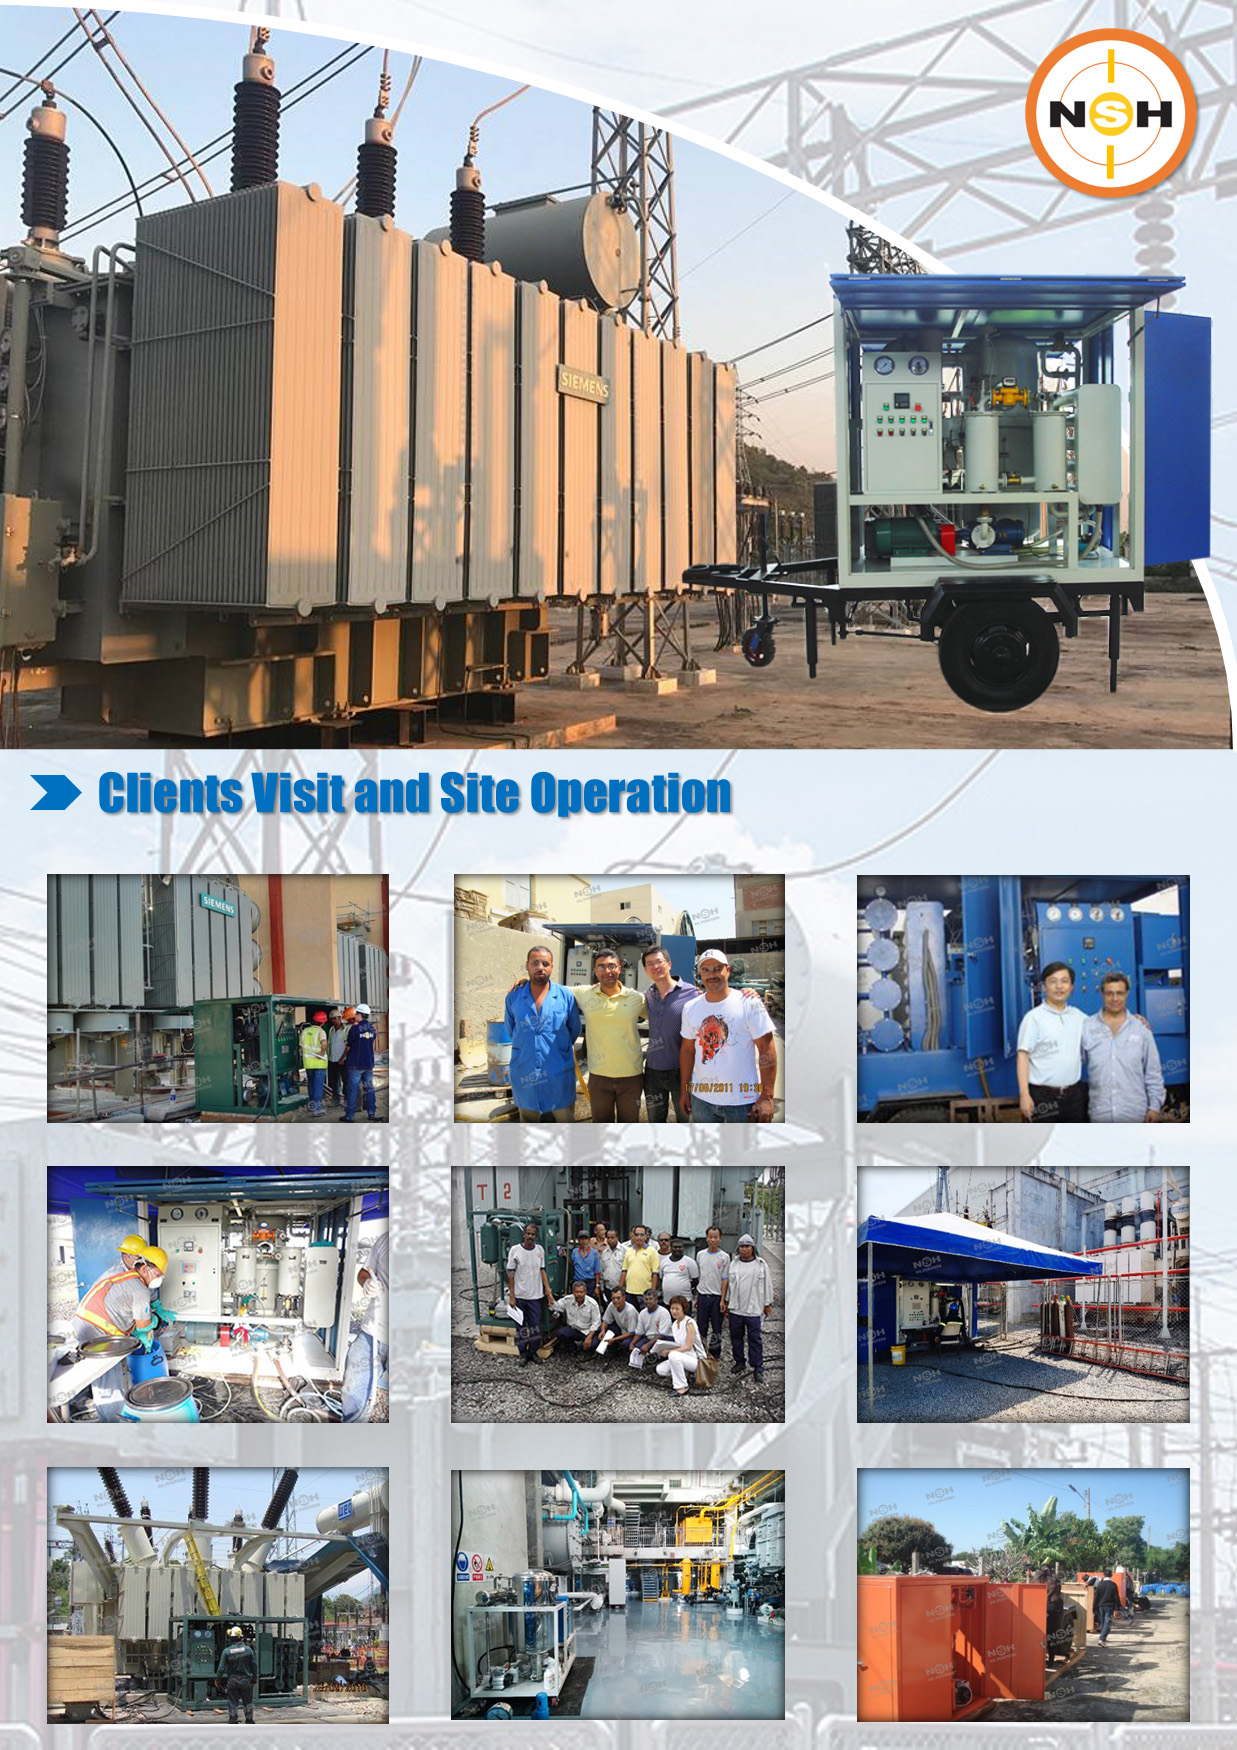 110KV Transformer Insulation Oil Purifier With Double Stage Vacuum Pump System